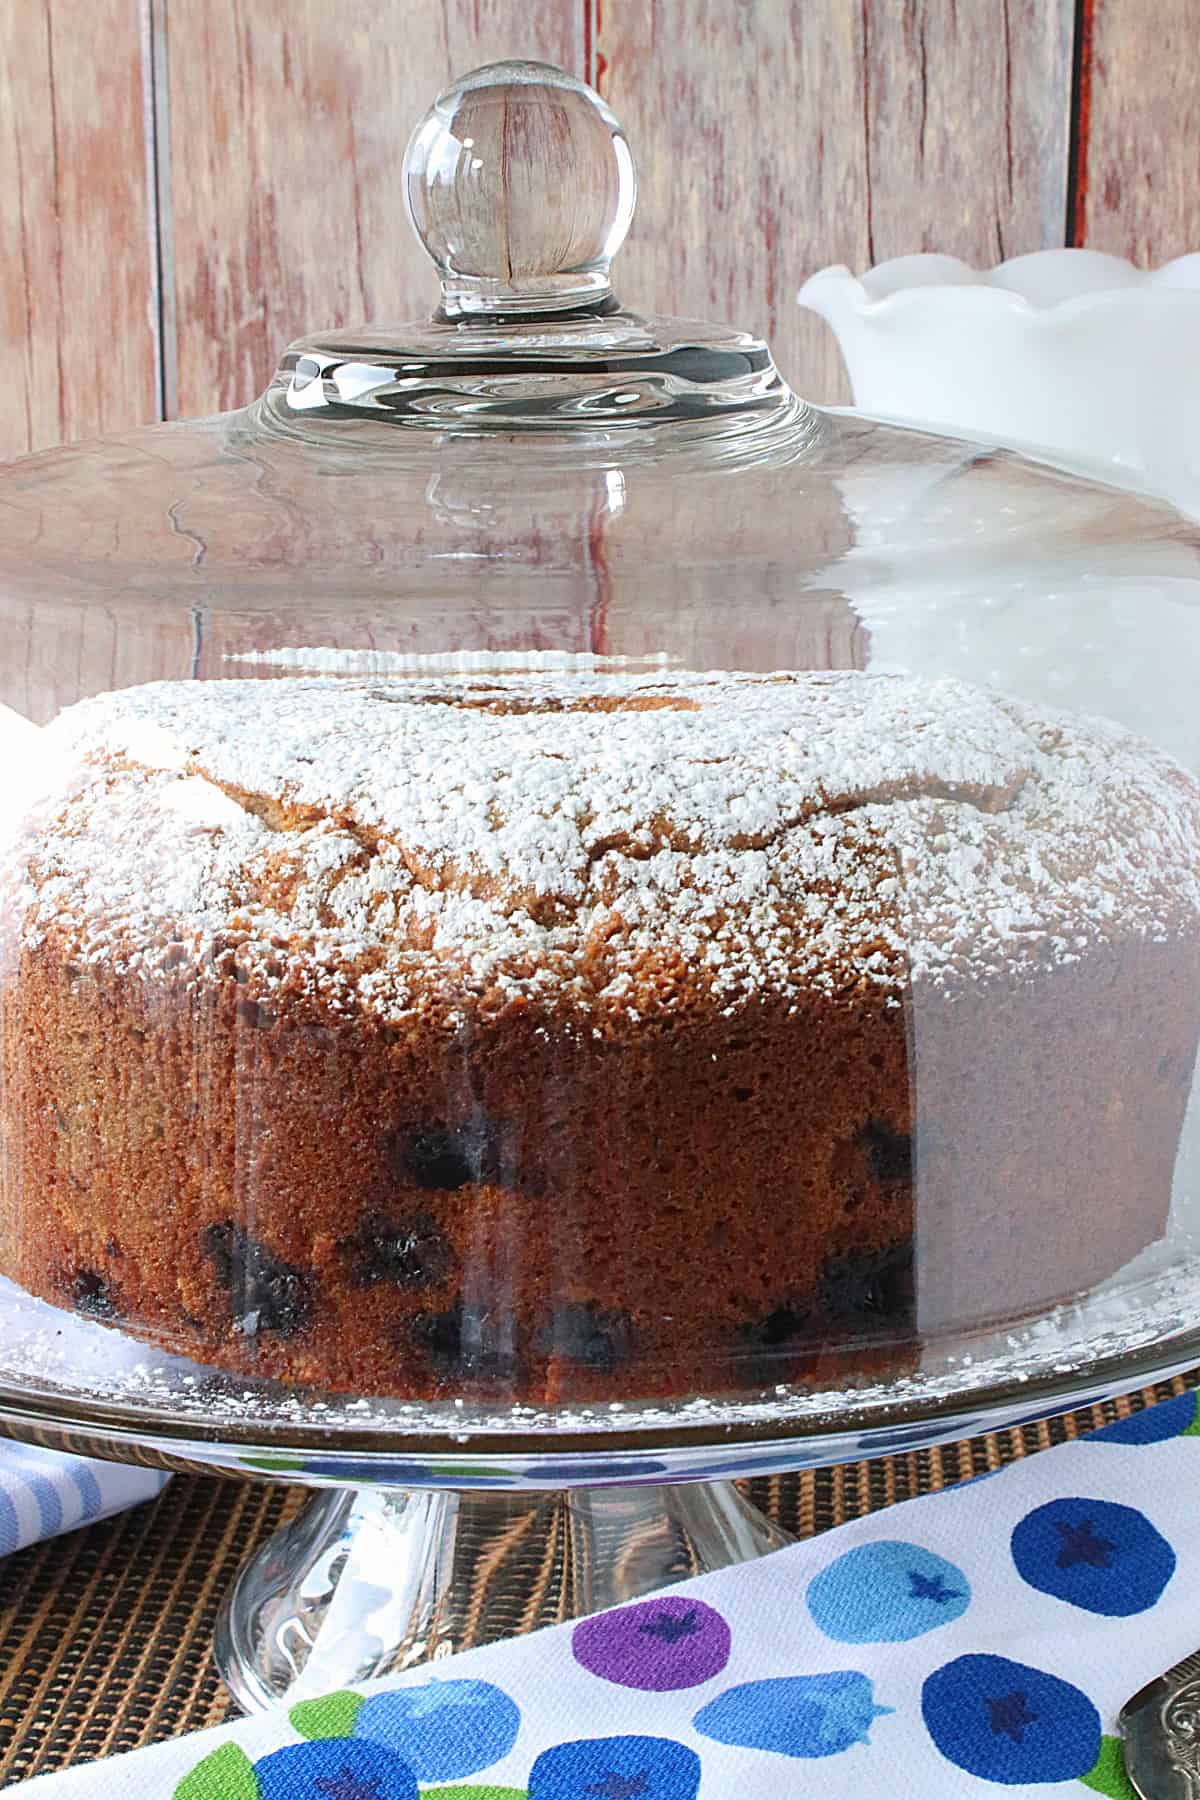 A Sour Cream Poundcake on a glass cake stand with a dome over the top of the cake.